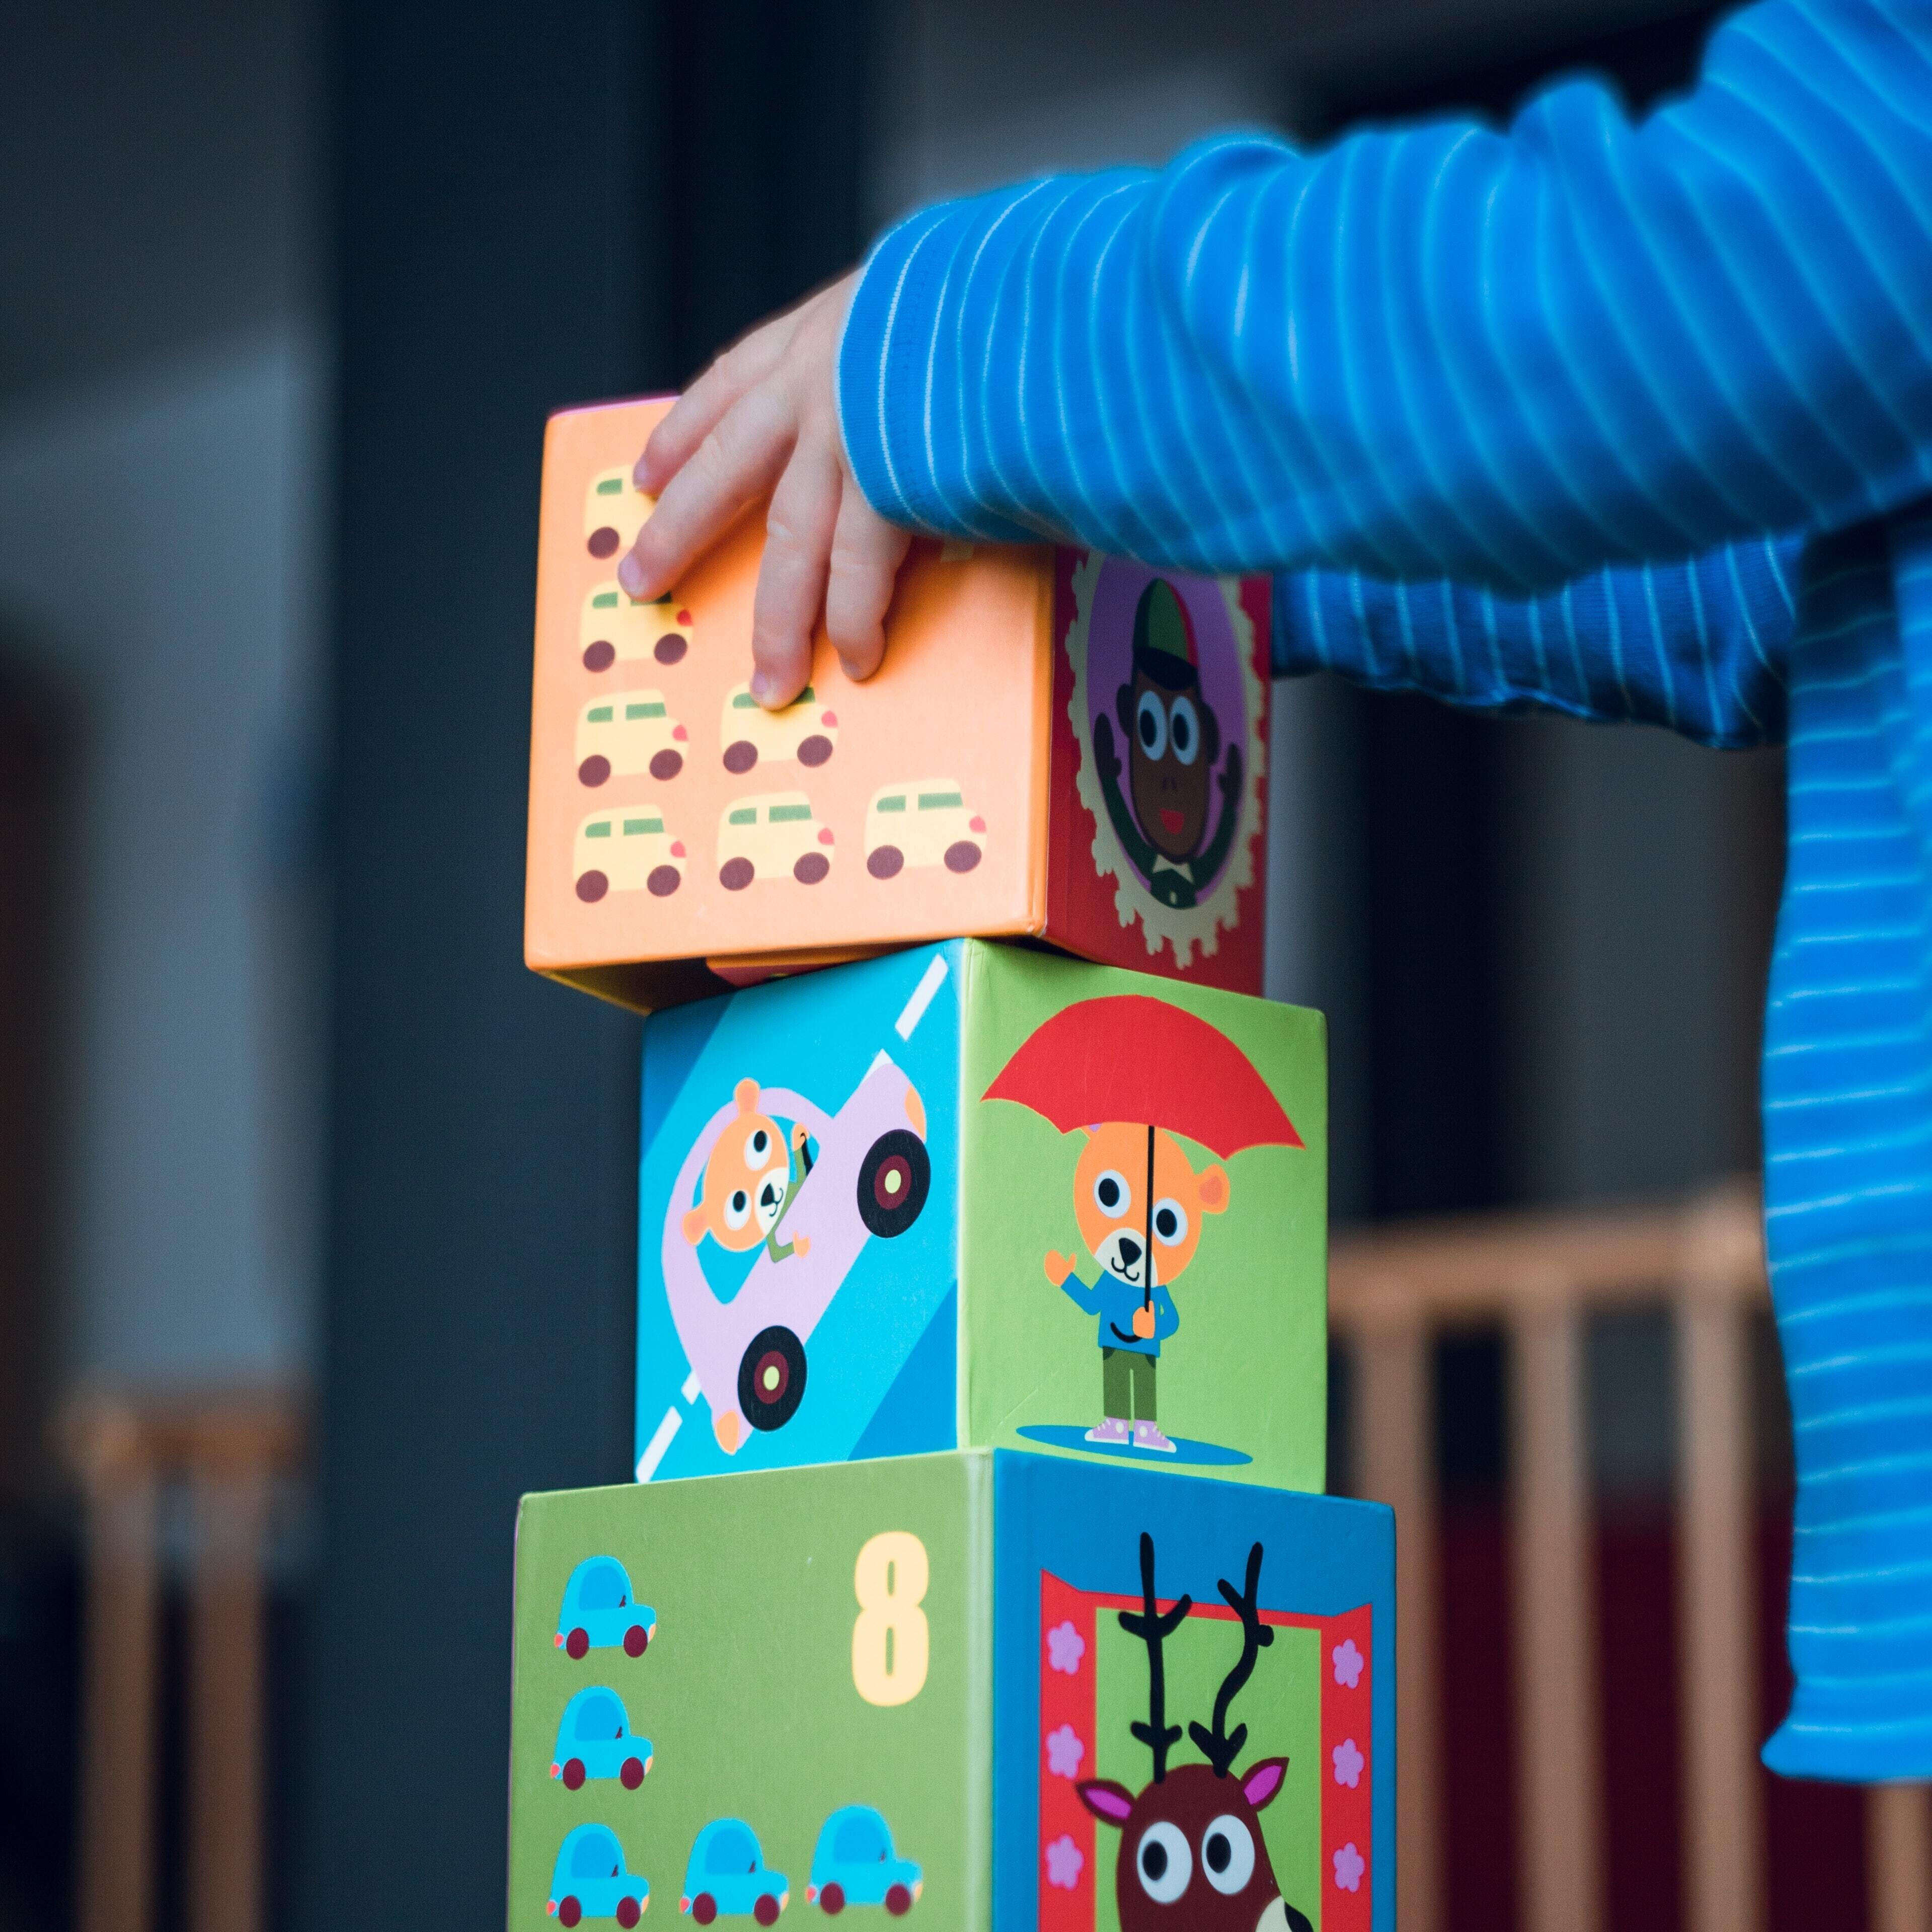 A child placing colorful blocks vertically 